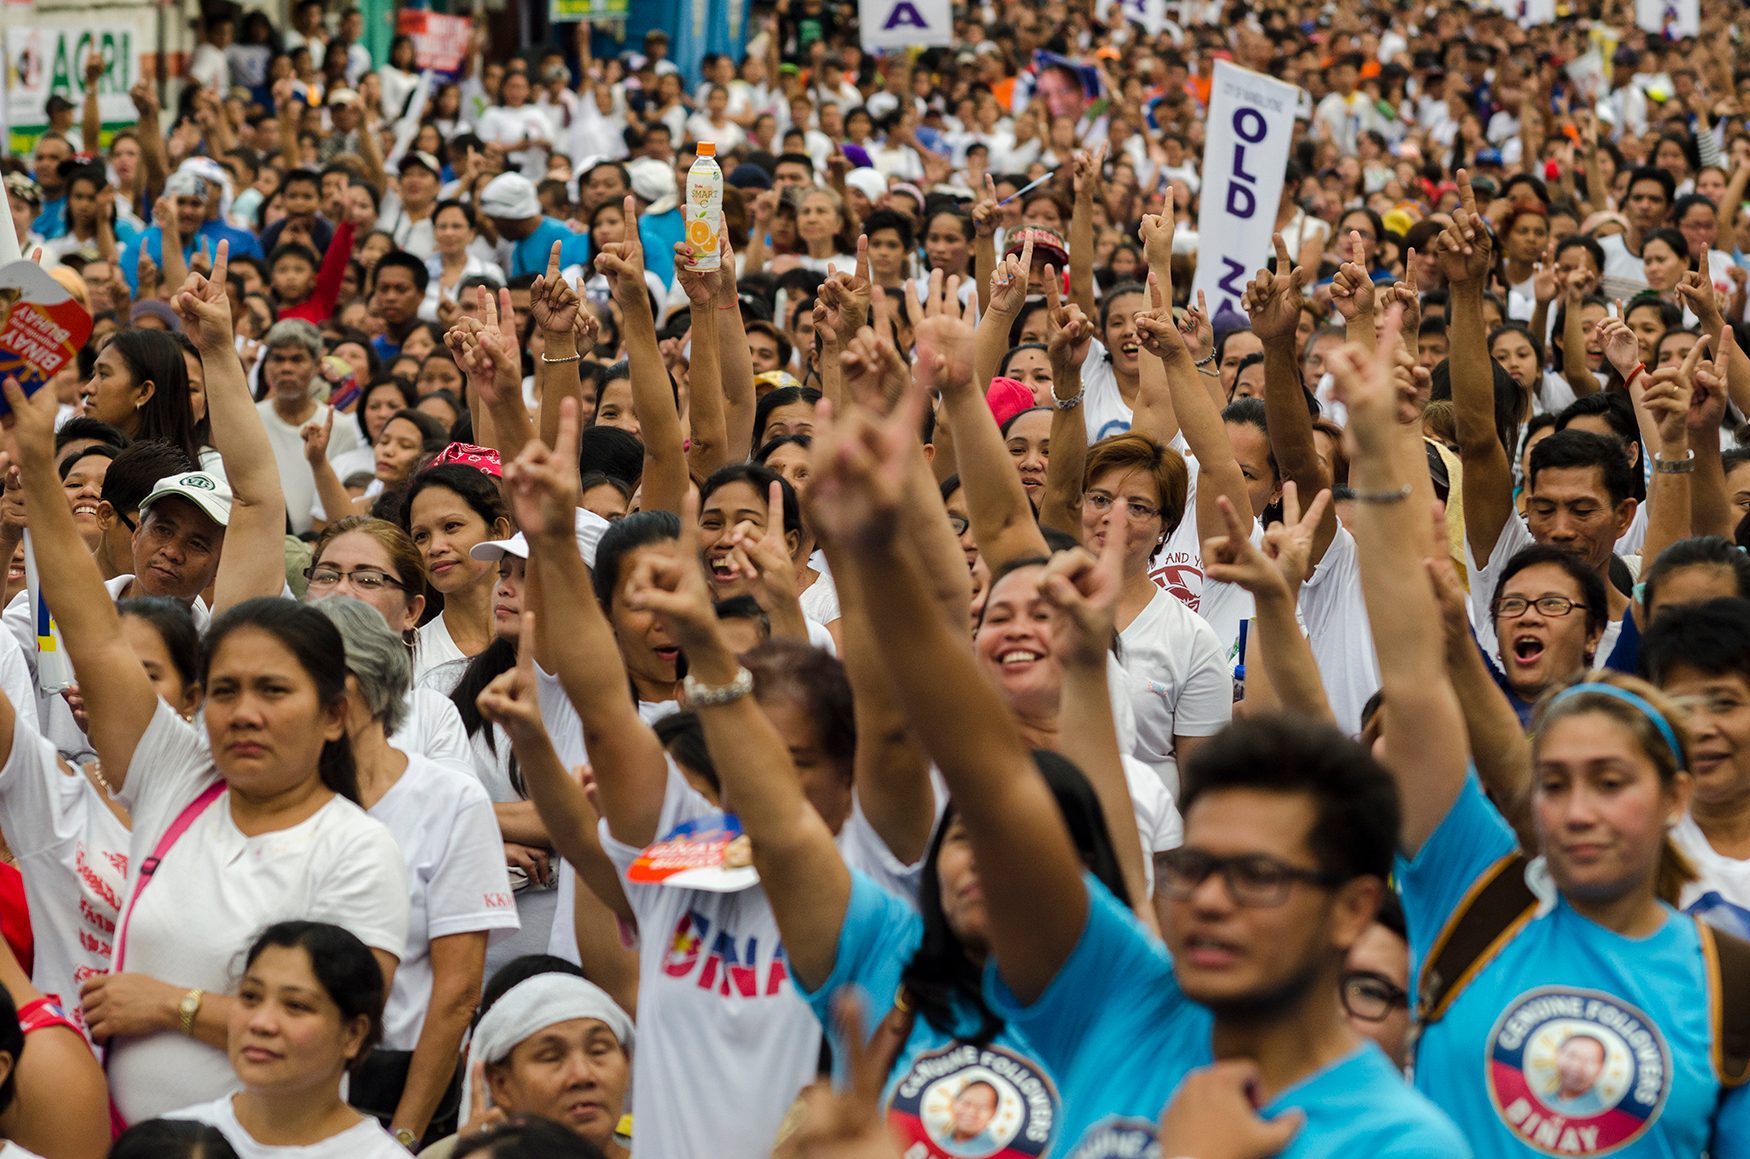 BY THE THOUSANDS. Around 30,000 supporters attended UNA's proclamation rally. Photo by Rob Reyes/Rappler 